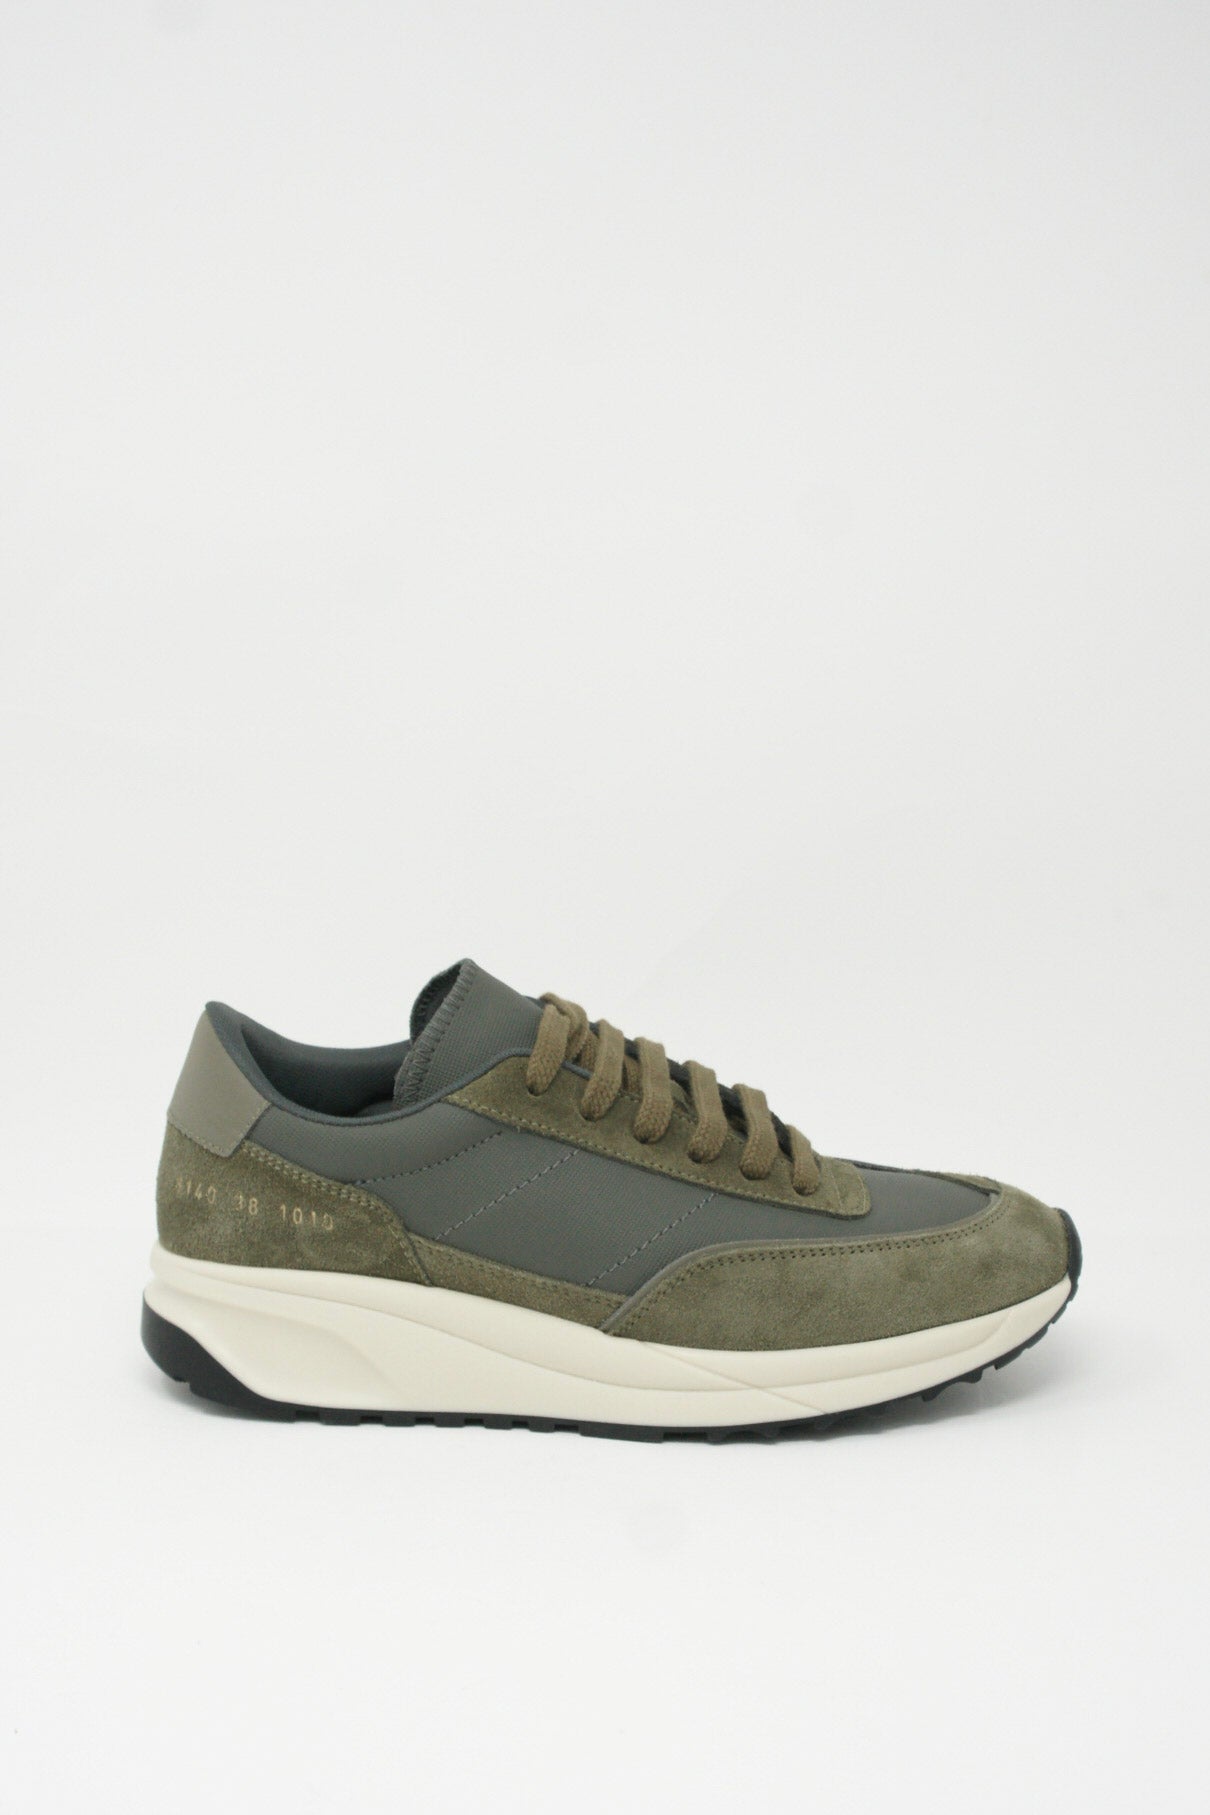 Track Technical Article Sneaker 6140 in Olive